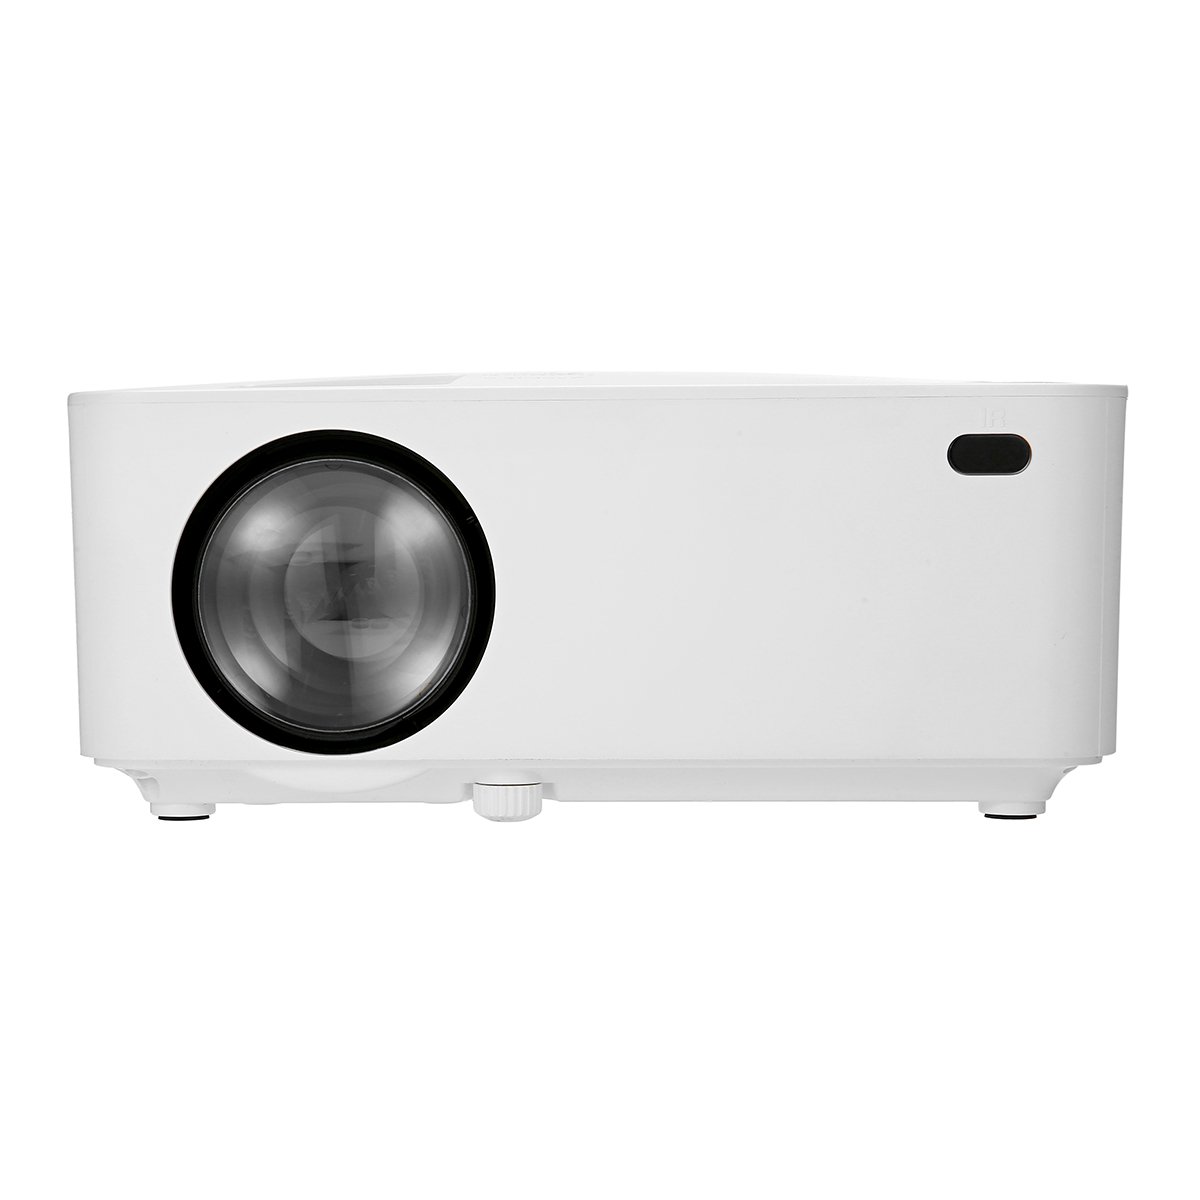 New Version Mini Projector 176" Display 1080P Full HD LCD Movie Projector, 50,000 Hours Lamp Life Home Theater Video Projector with HDMI/AV Cable and 1